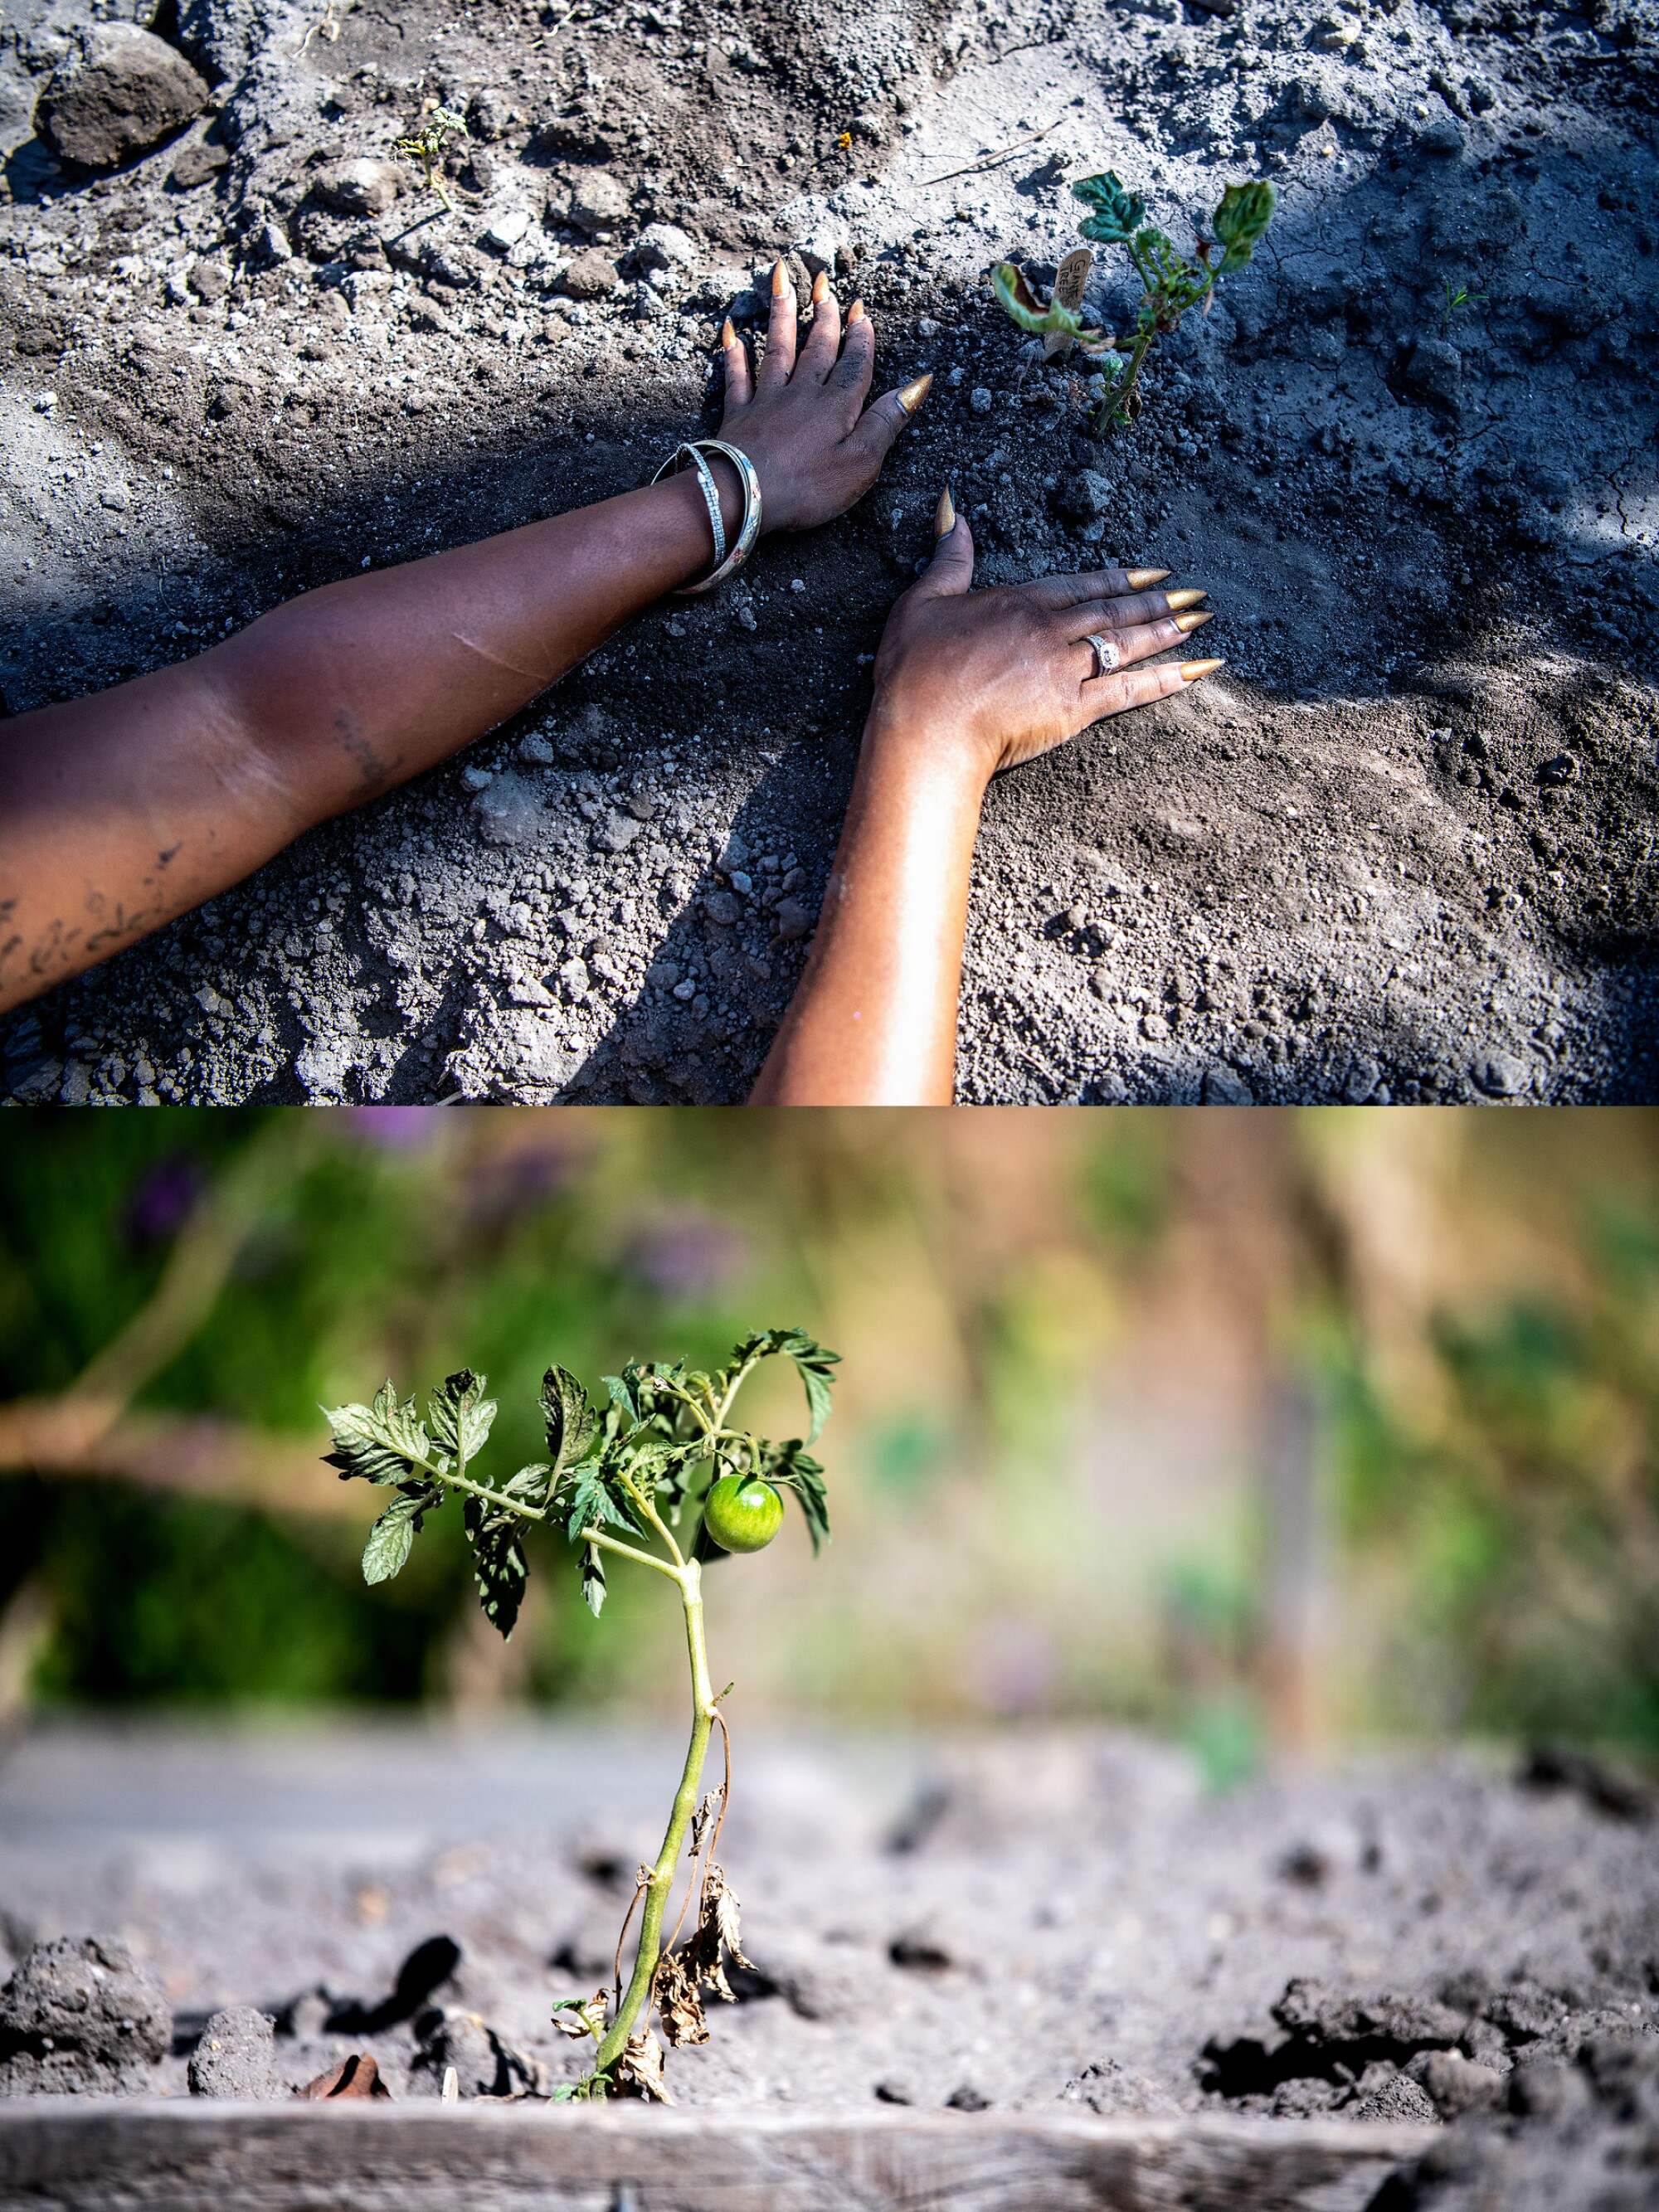 Two photos, the top one of Genea Richardson's hands working through soil and the bottom one of a young tomato plant.